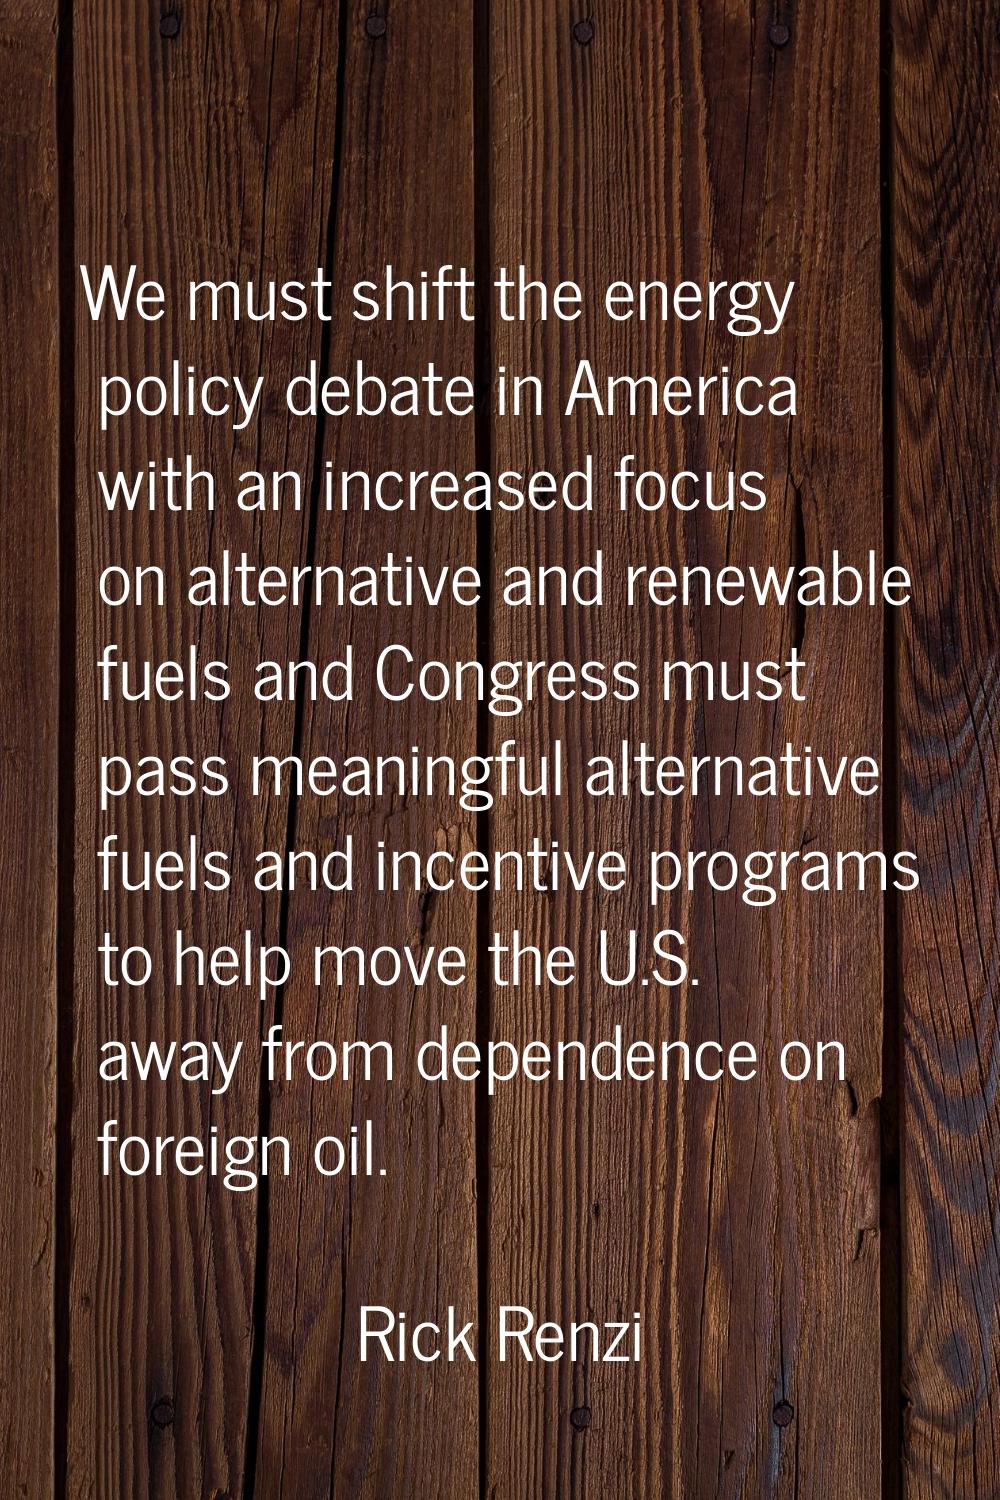 We must shift the energy policy debate in America with an increased focus on alternative and renewa